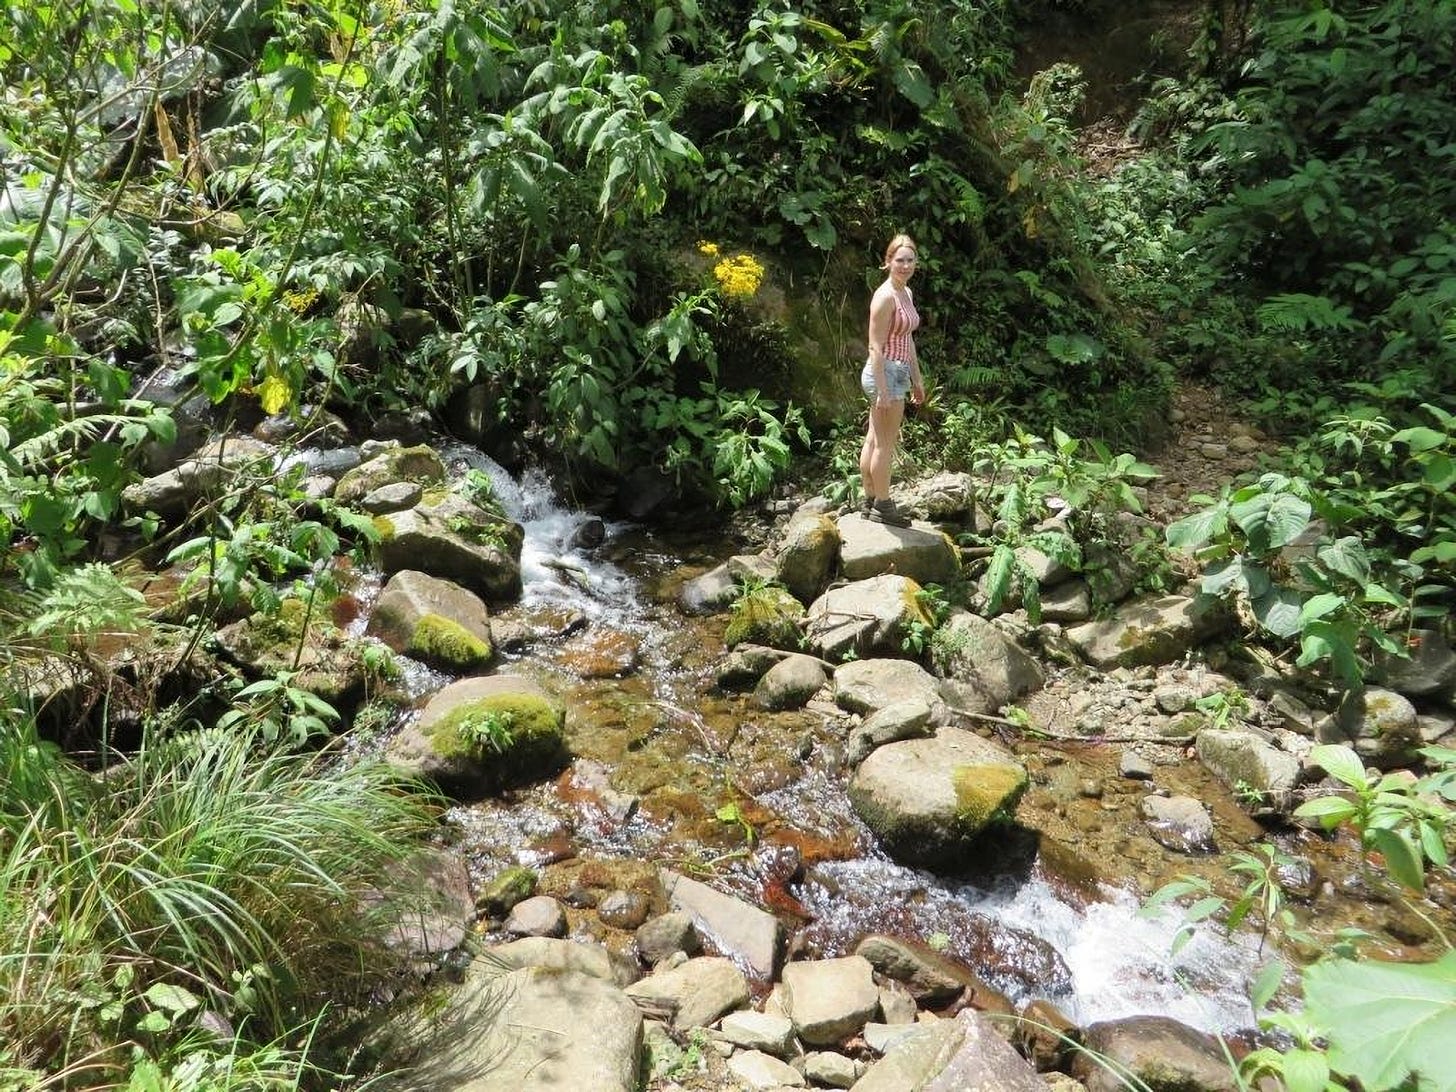 A young woman crosses a small stream in a jungle.